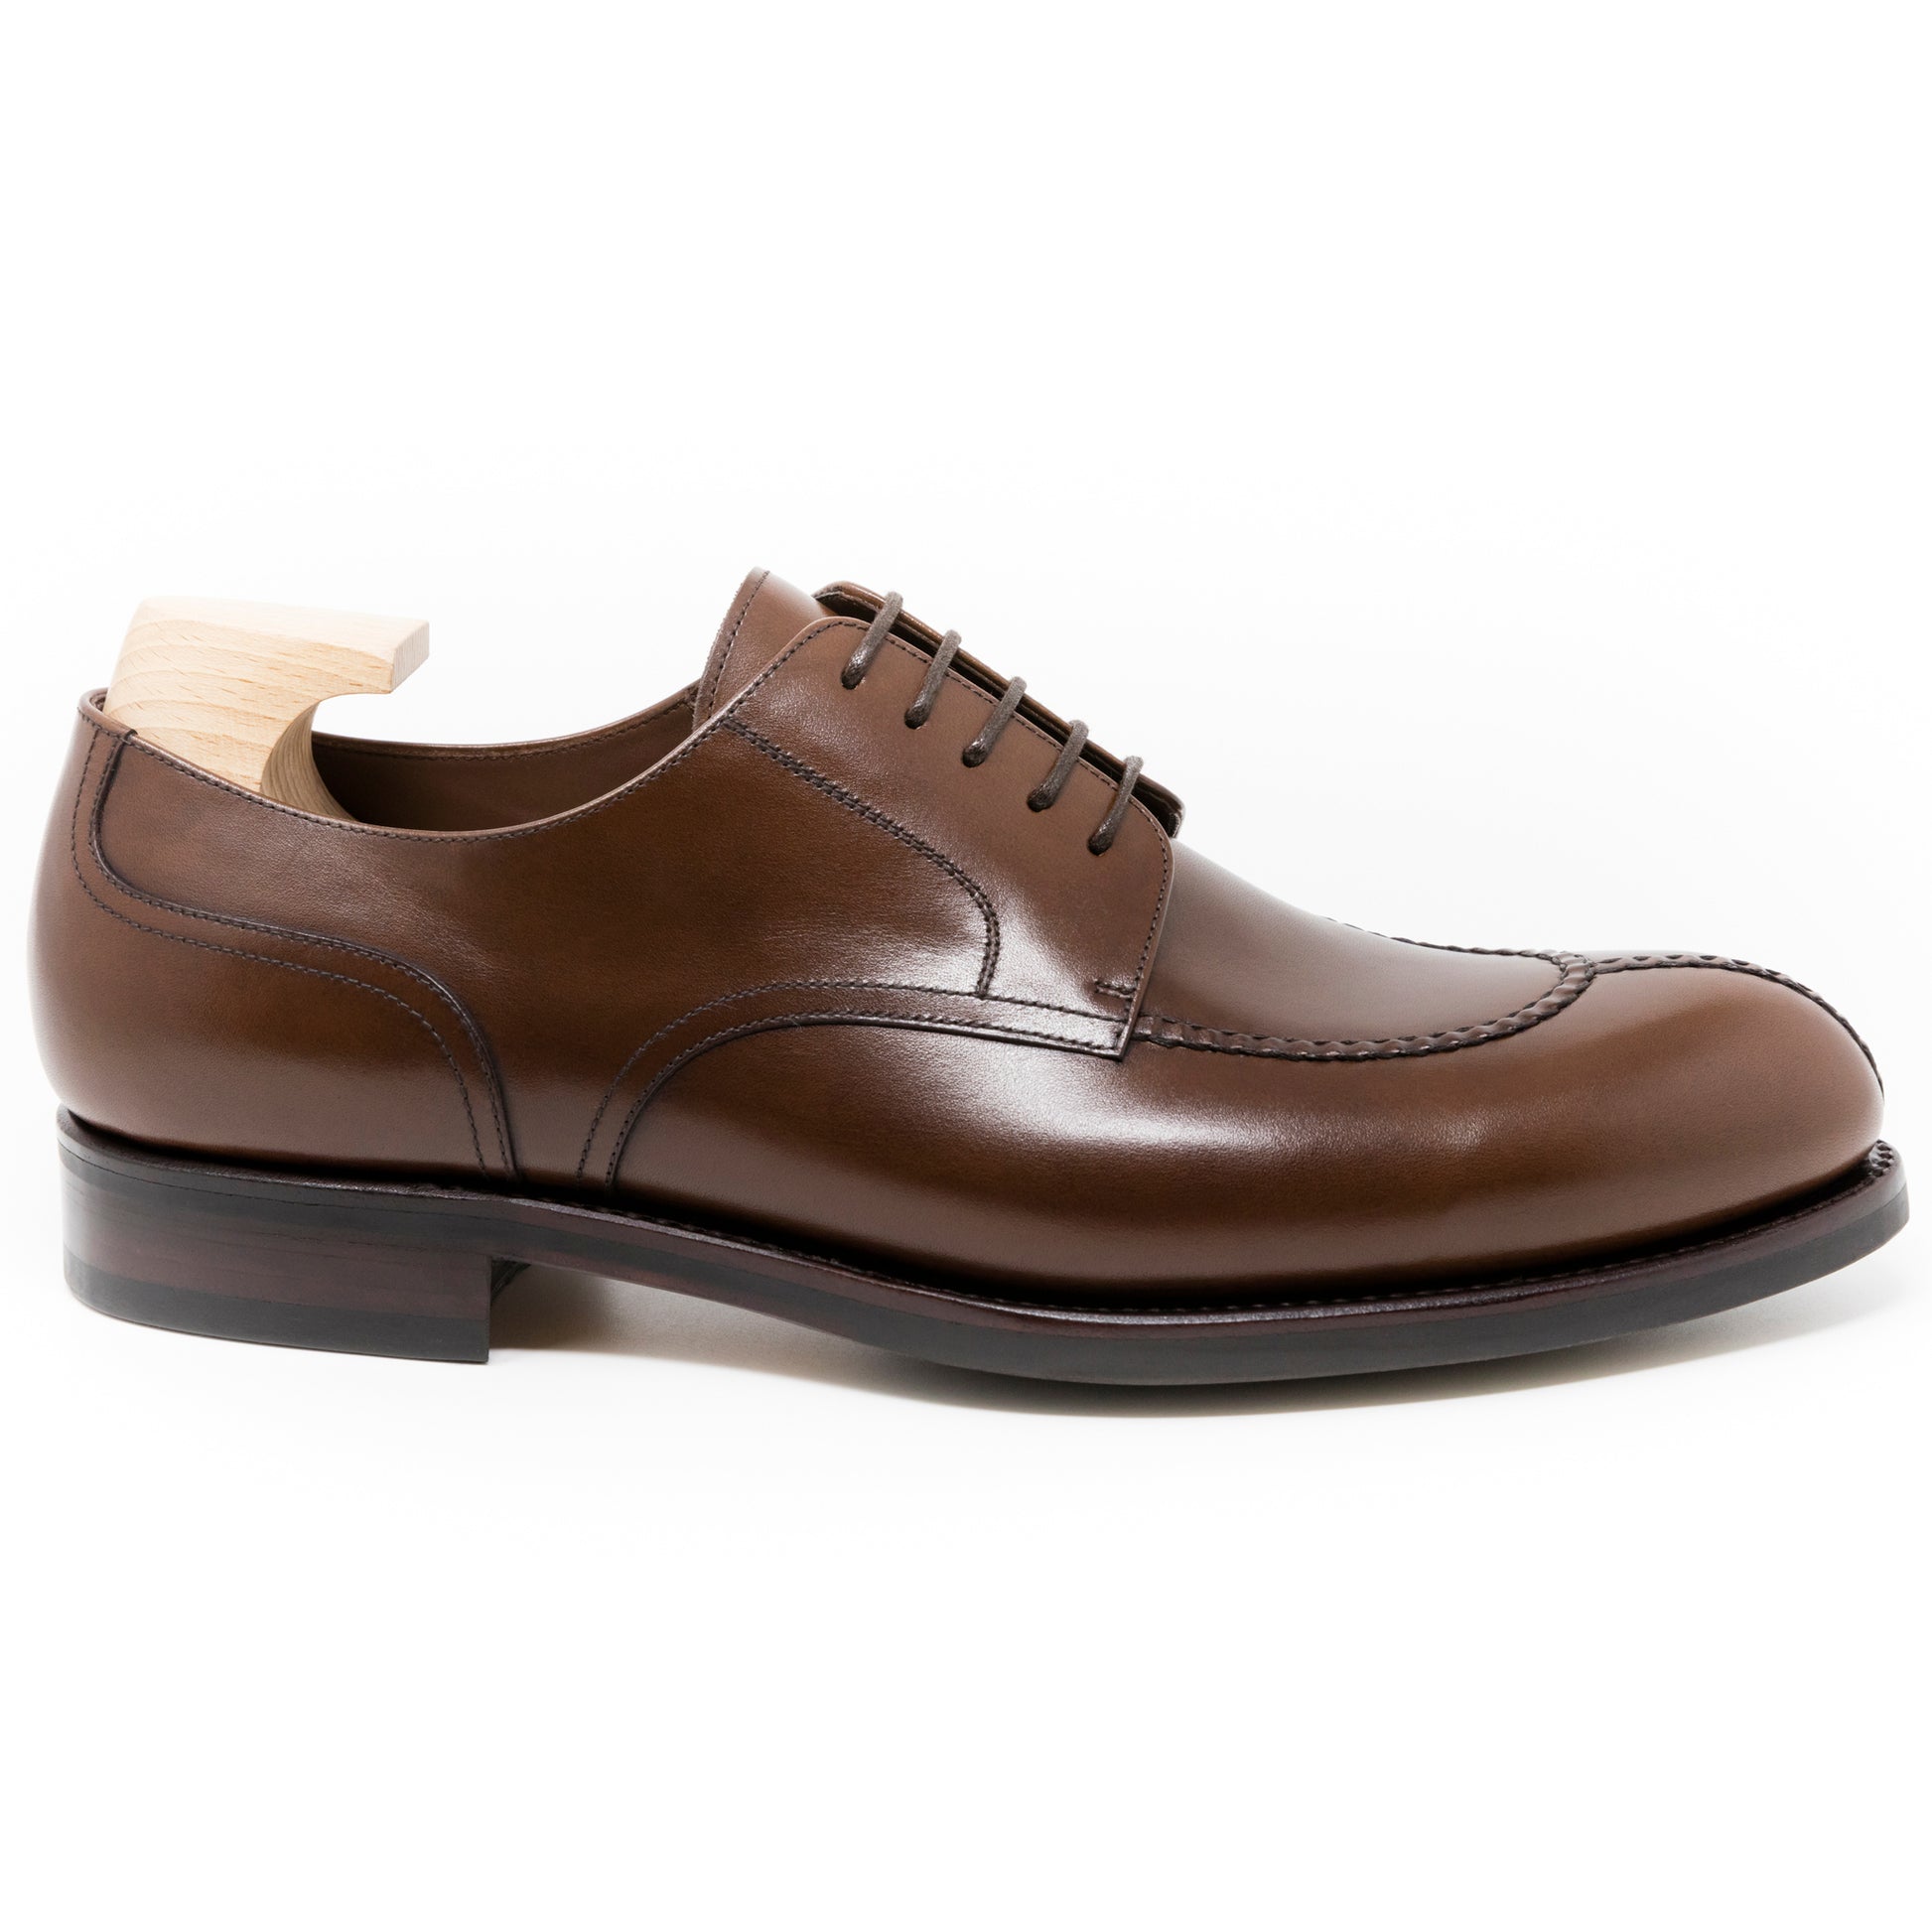 TLB Mallorca leather shoes 534 / HOWARD / VEGANO BROWN